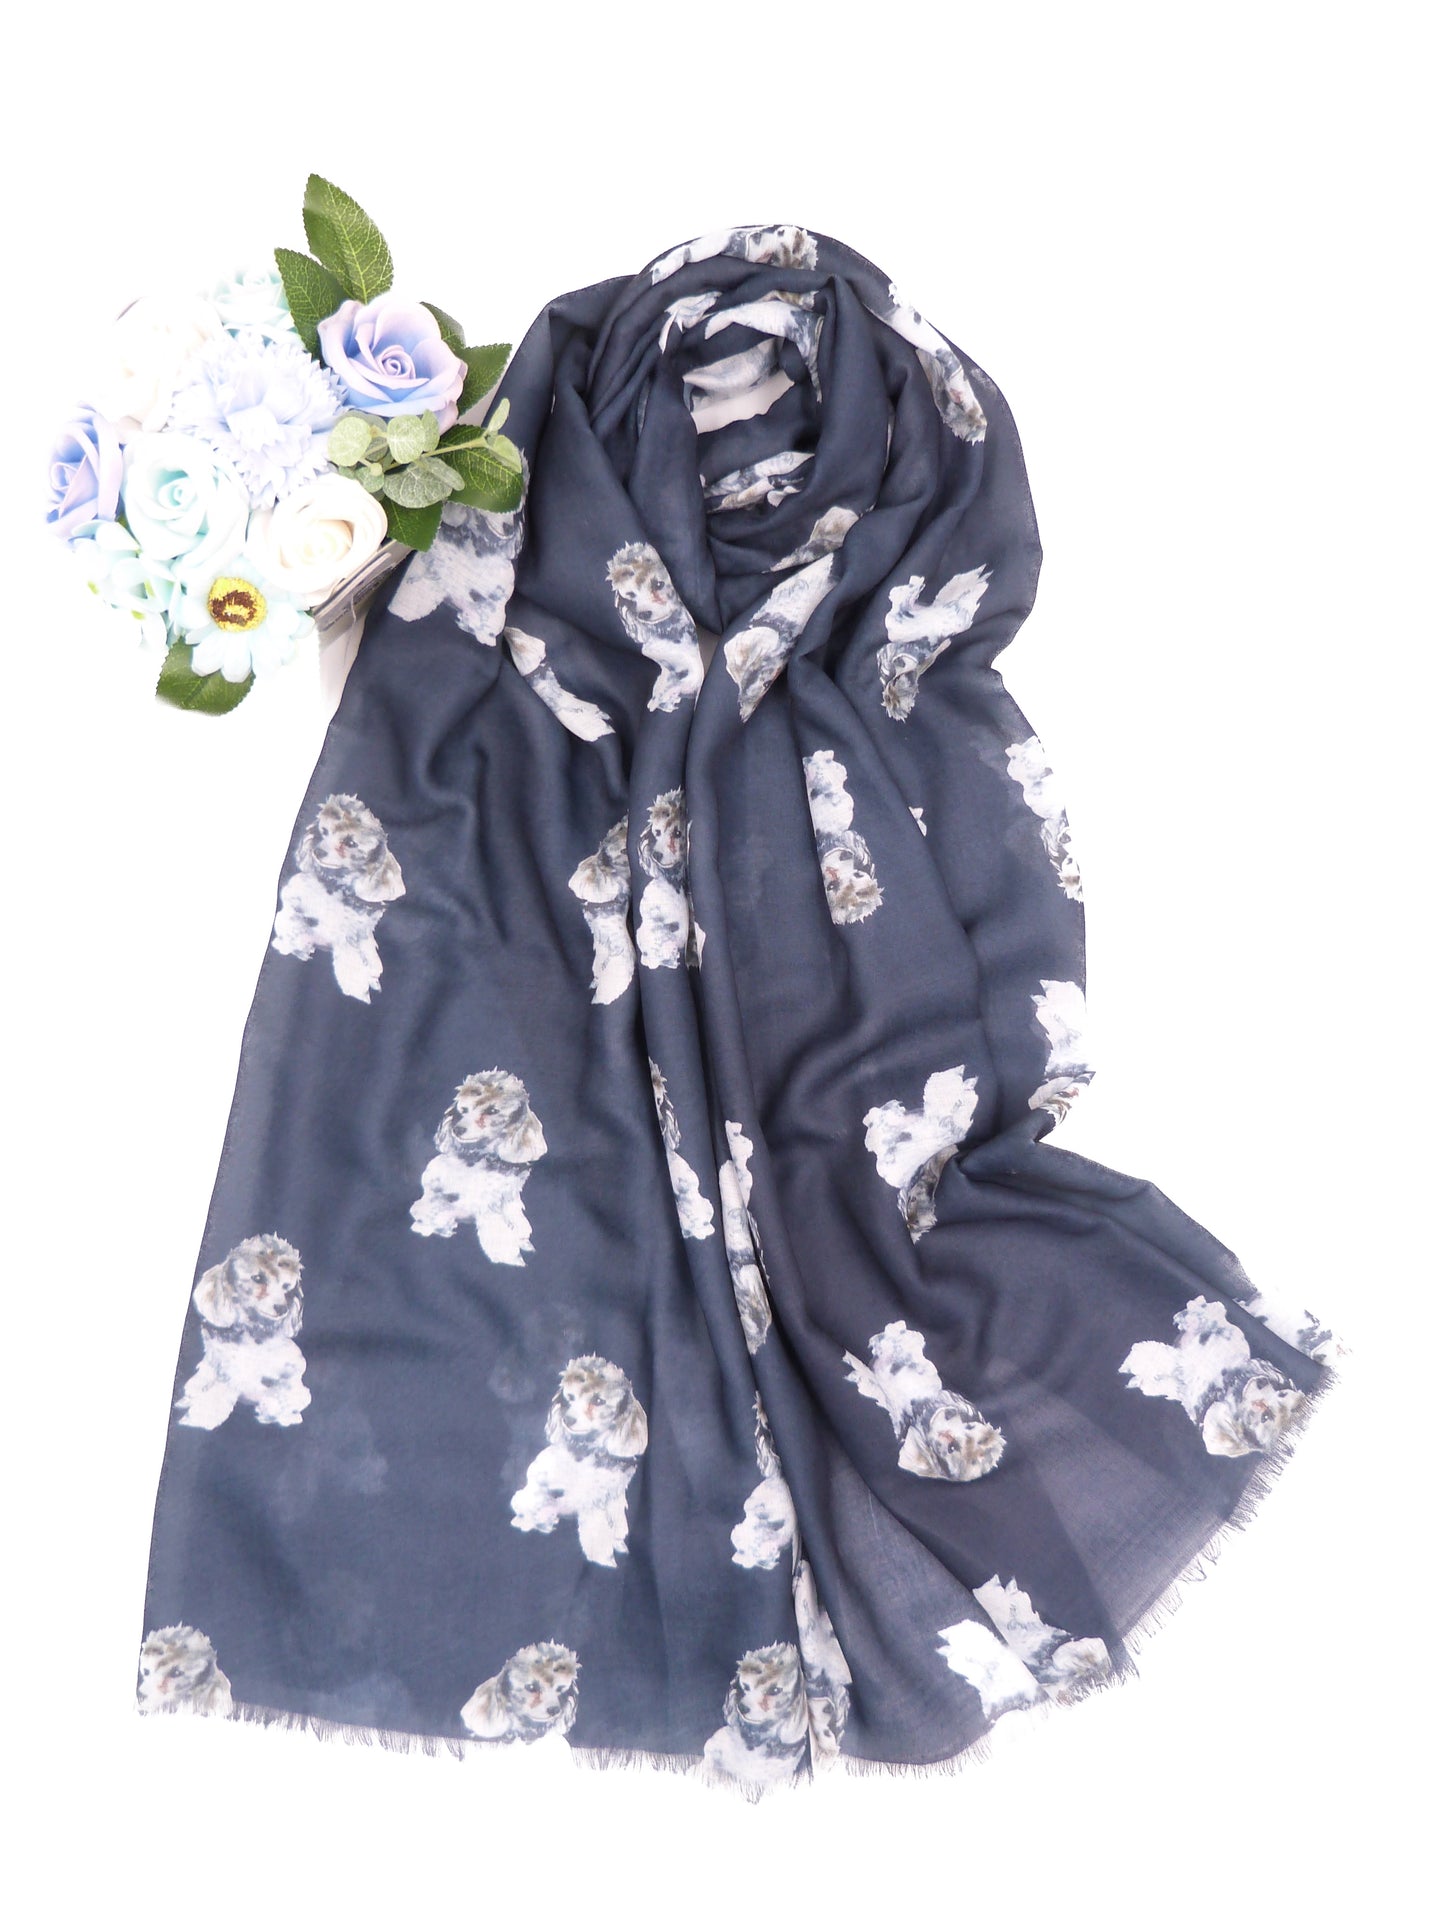 Cute Poodle Dog Print Scarf Come With Gift Box